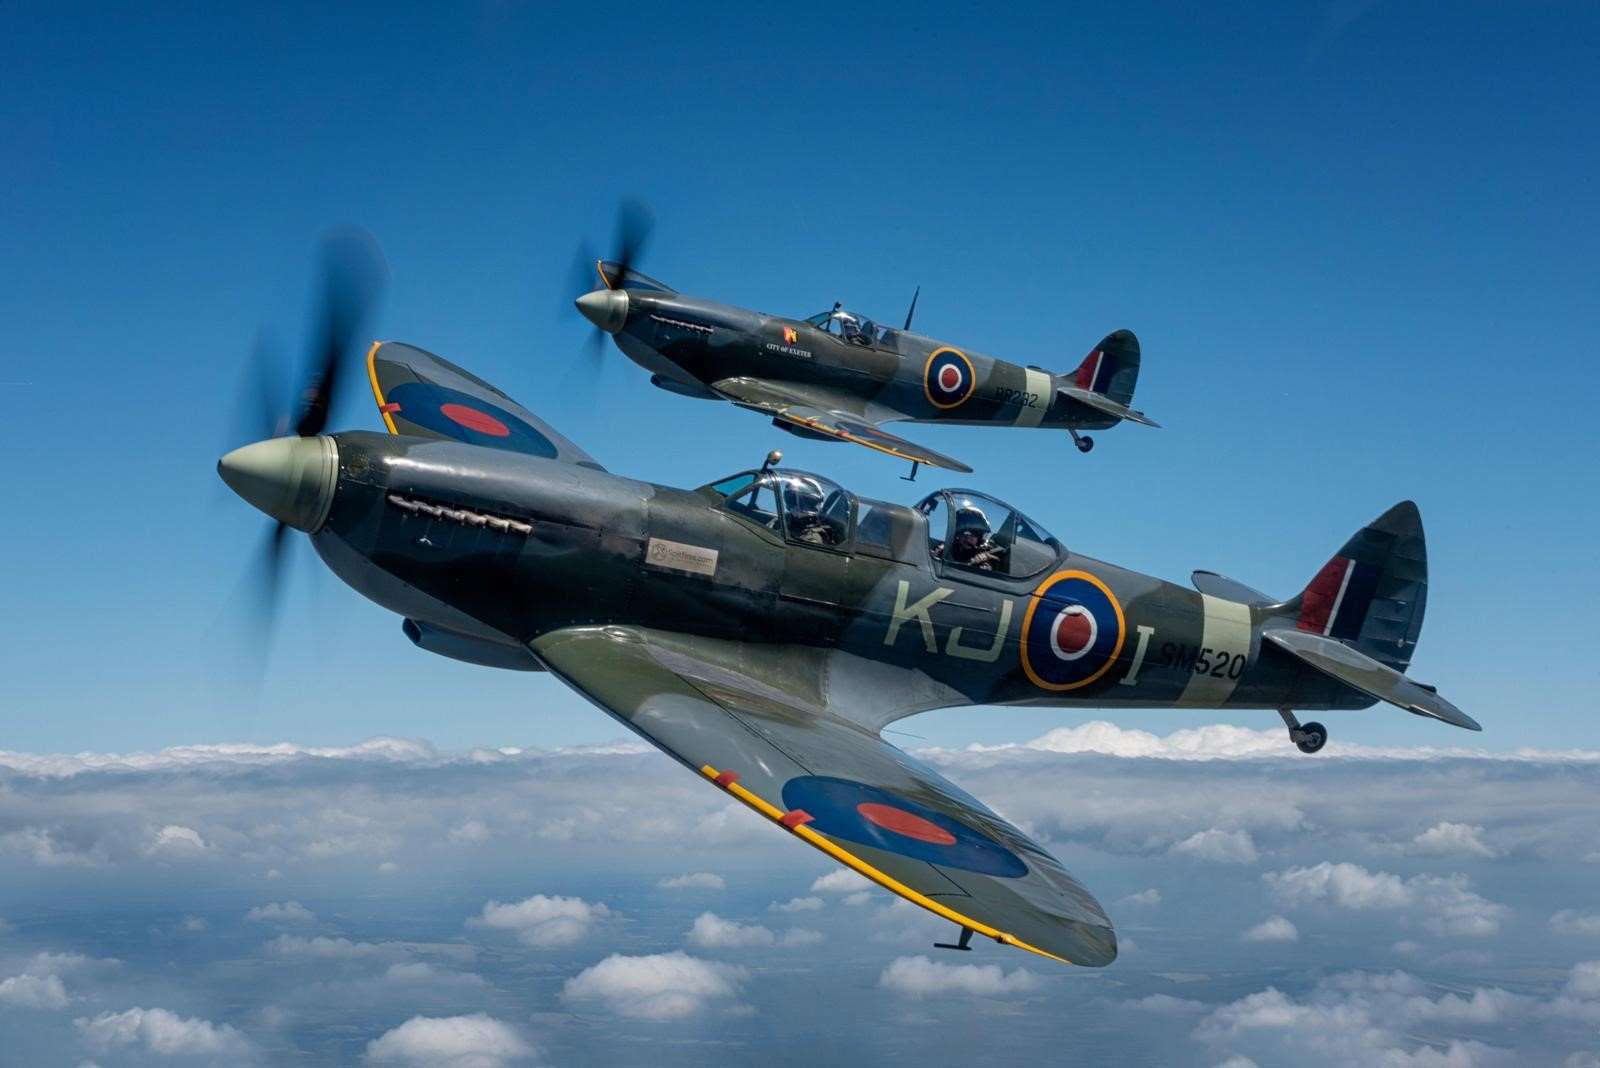 spitfires-photograph-from-richie-southerton-002.jpg